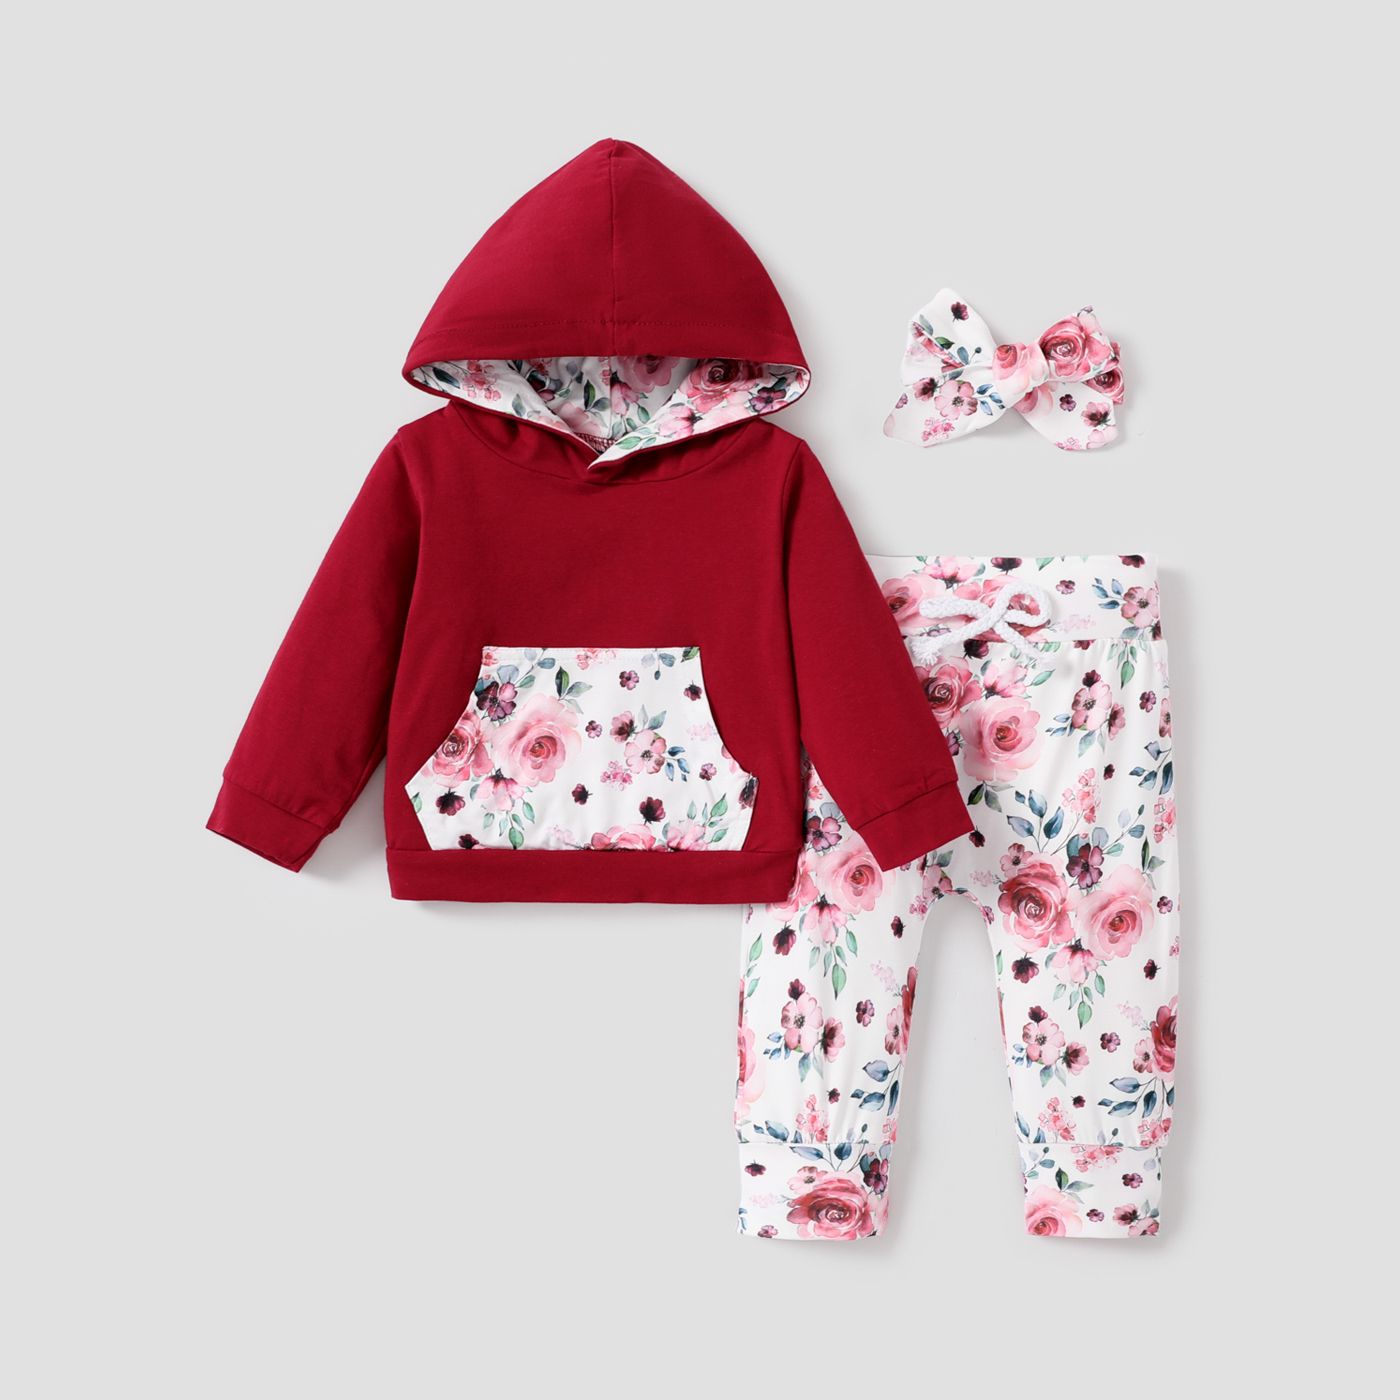 3pcs Baby Girl 95% Cotton Long-sleeve Hoodie And Floral Print Pants With Headband Set